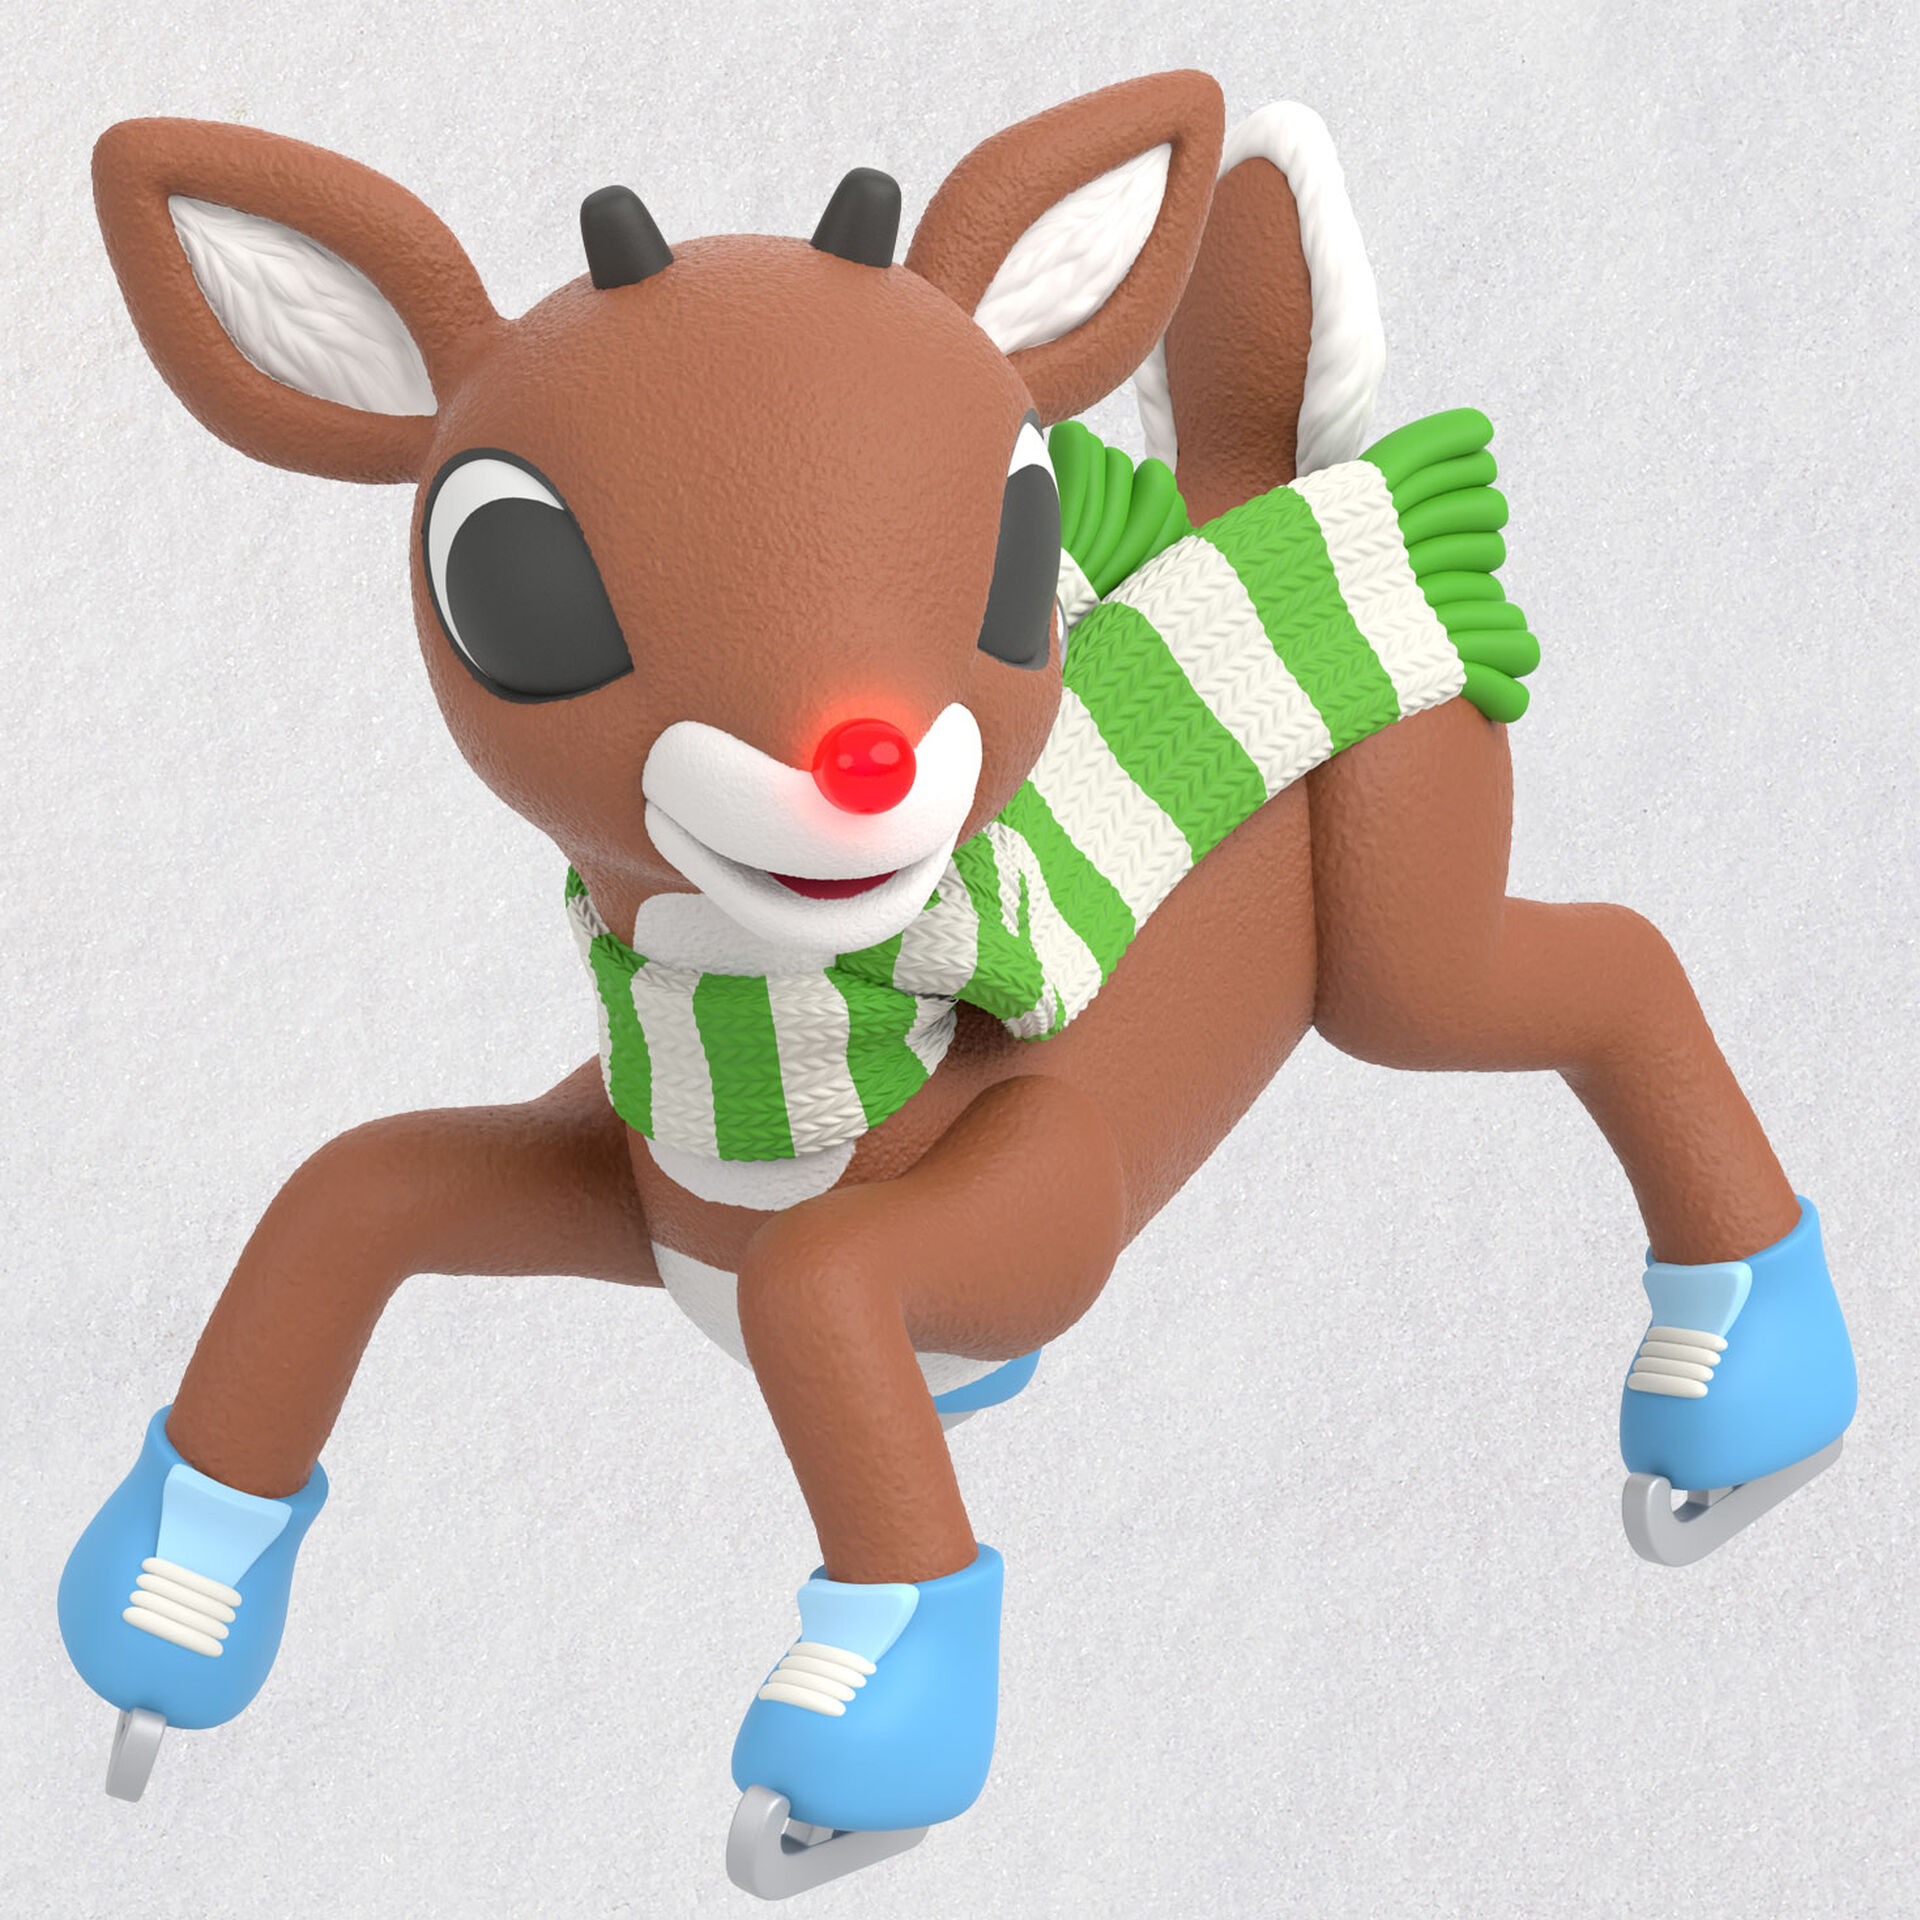 Rudolph the Red-Nosed Reindeer® Slippery Skating 2020 Ornament With Light - Occasions Hallmark Gifts and More